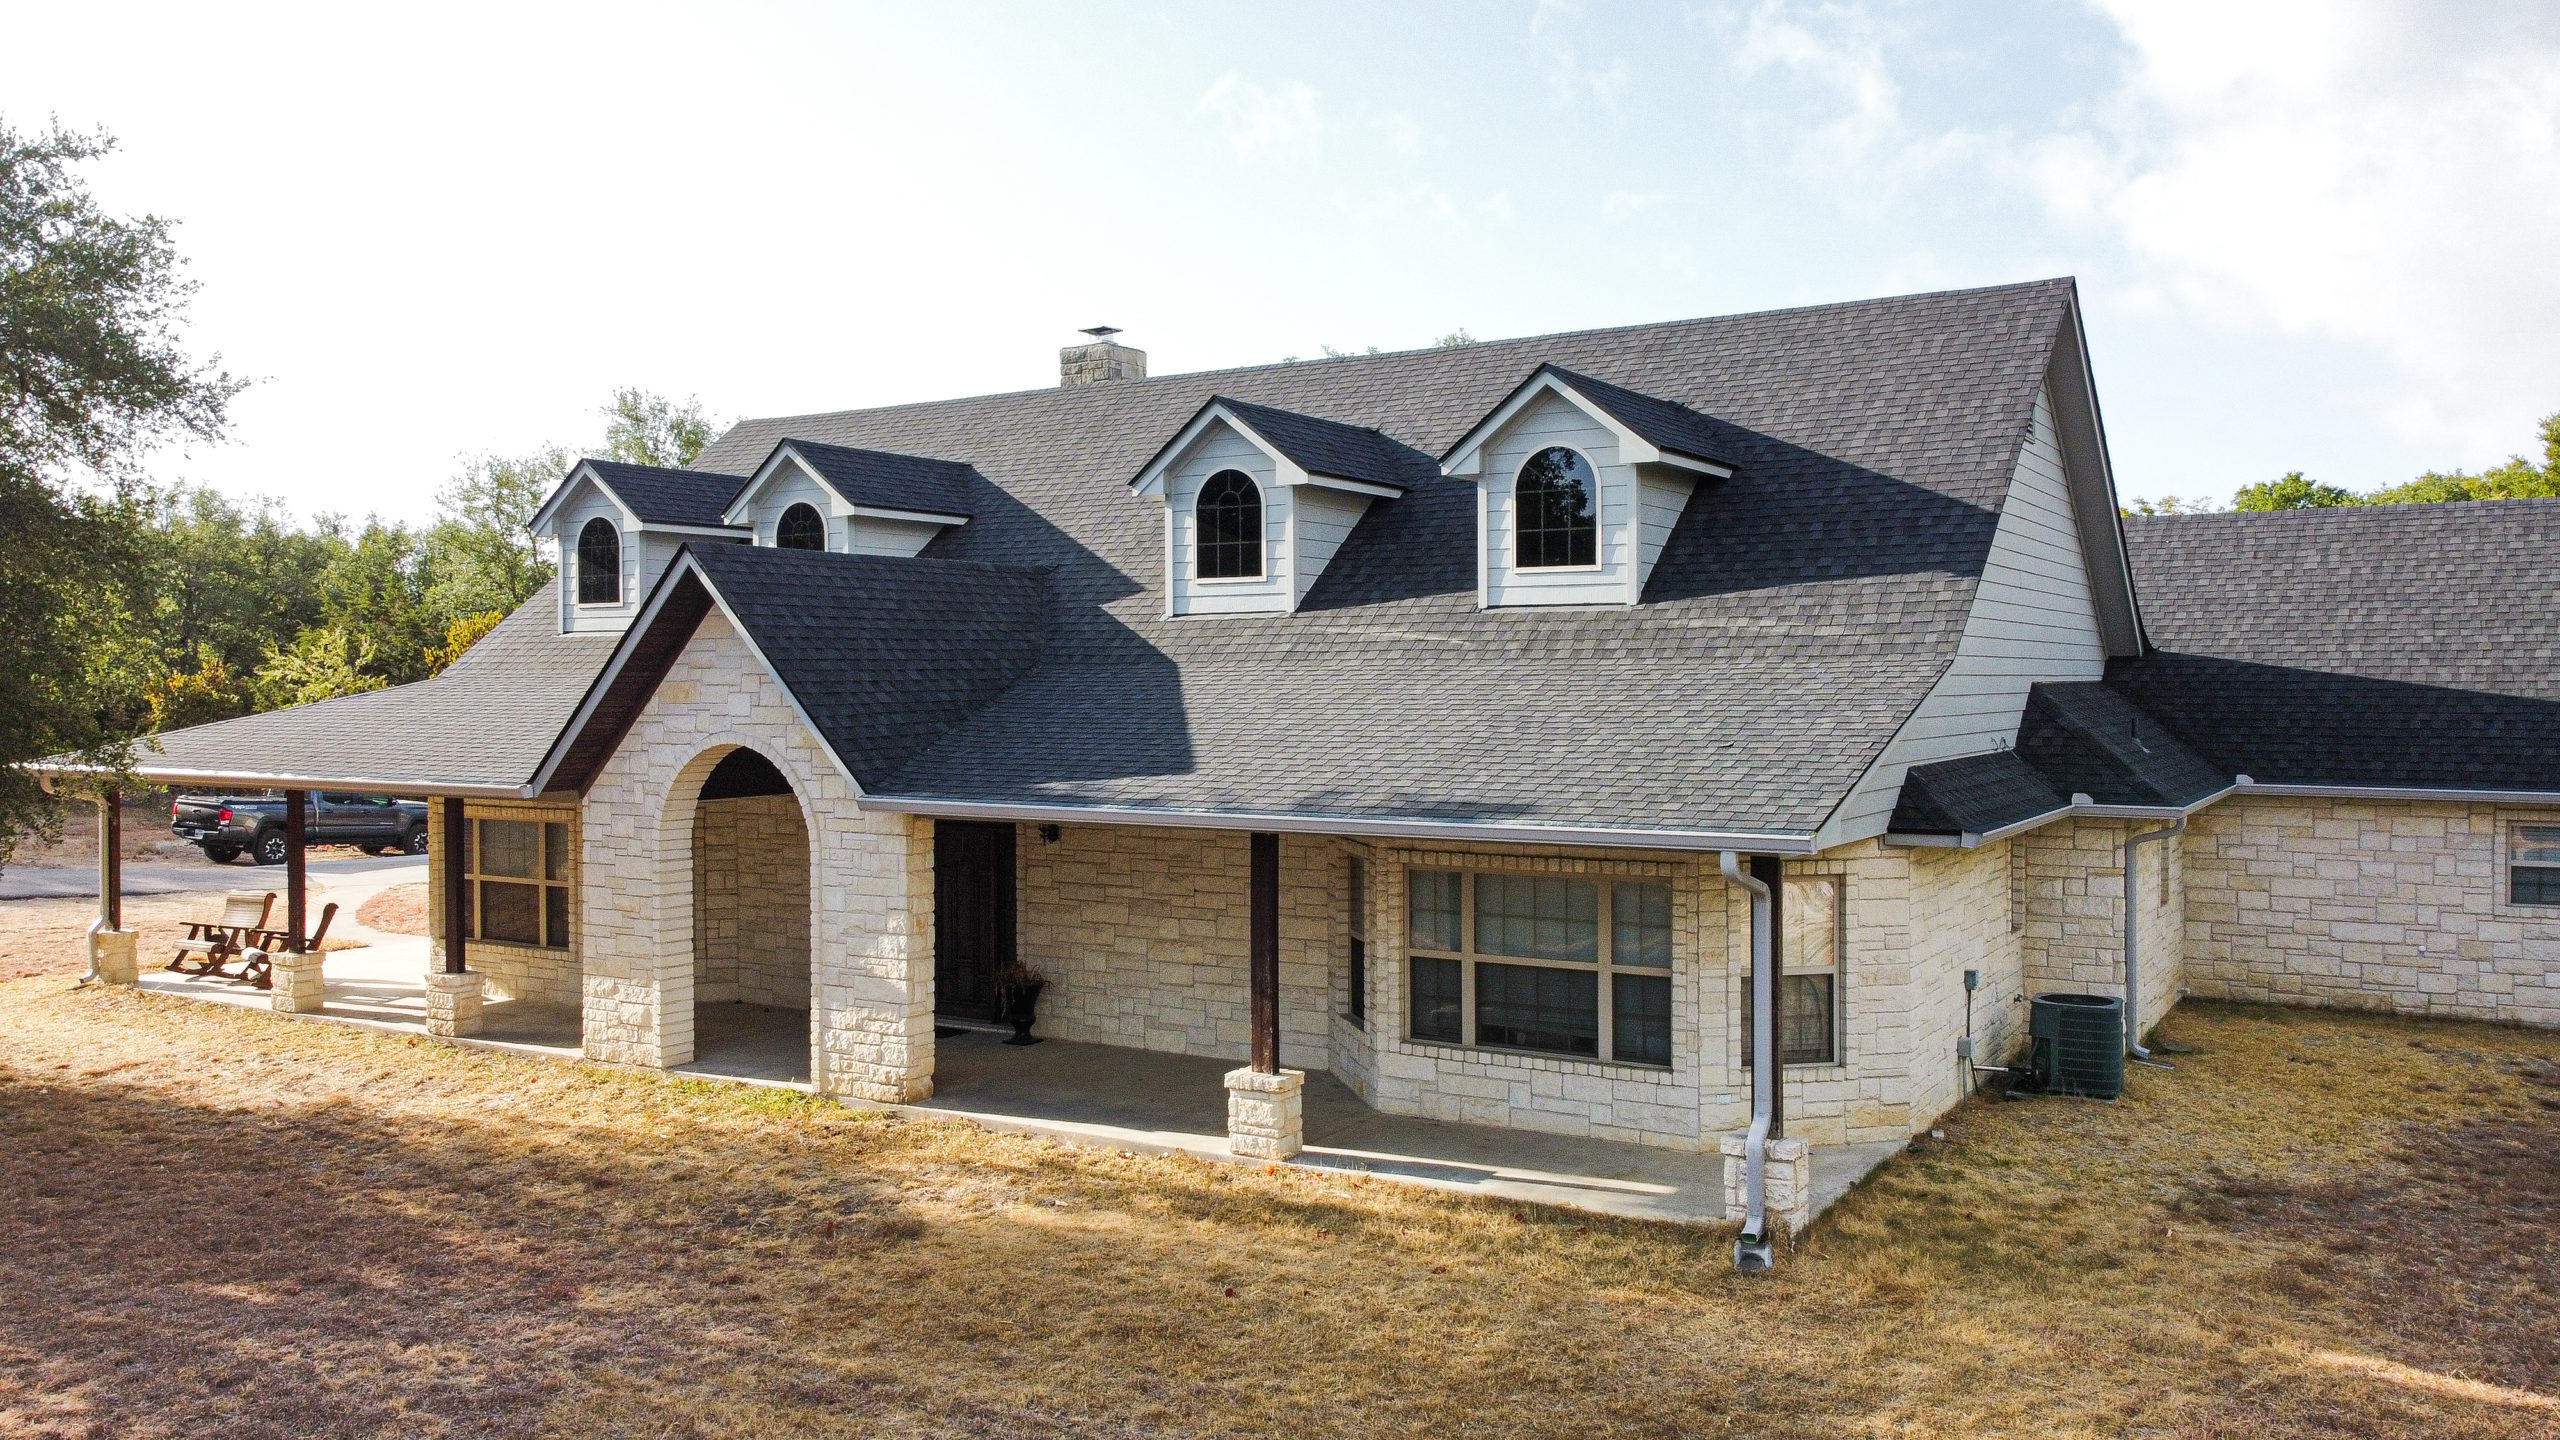 TAMKO Heritage in Rustic Black roof replaced by Whitish Roofing in Troy Central Texas roofer.